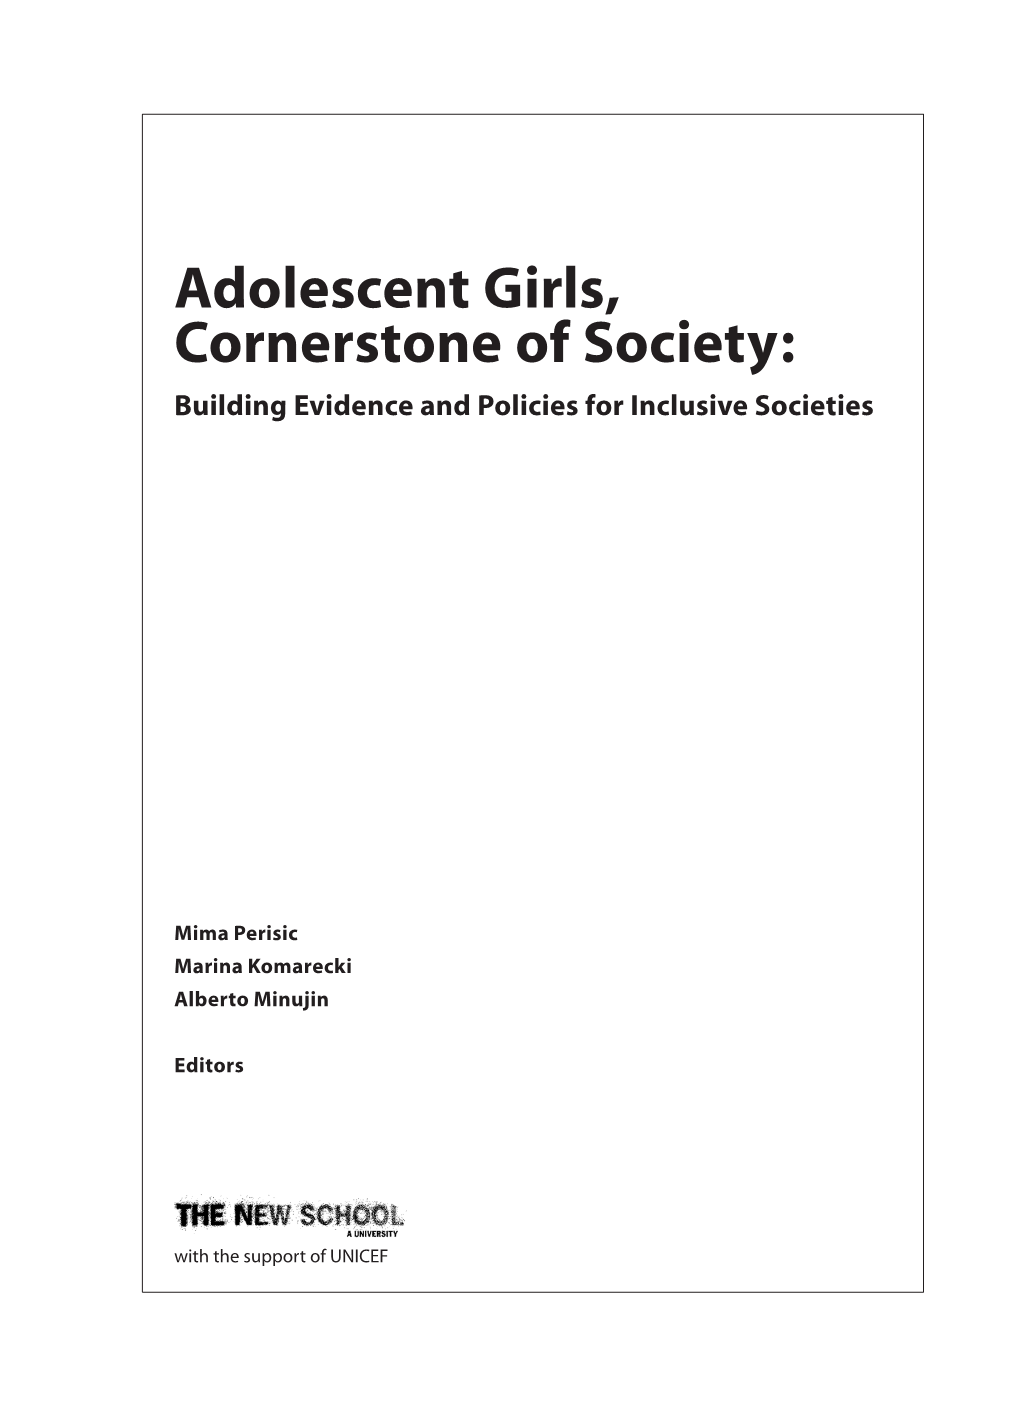 Adolescent Girls, Cornerstone of Society: Building Evidence and Policies for Inclusive Societies